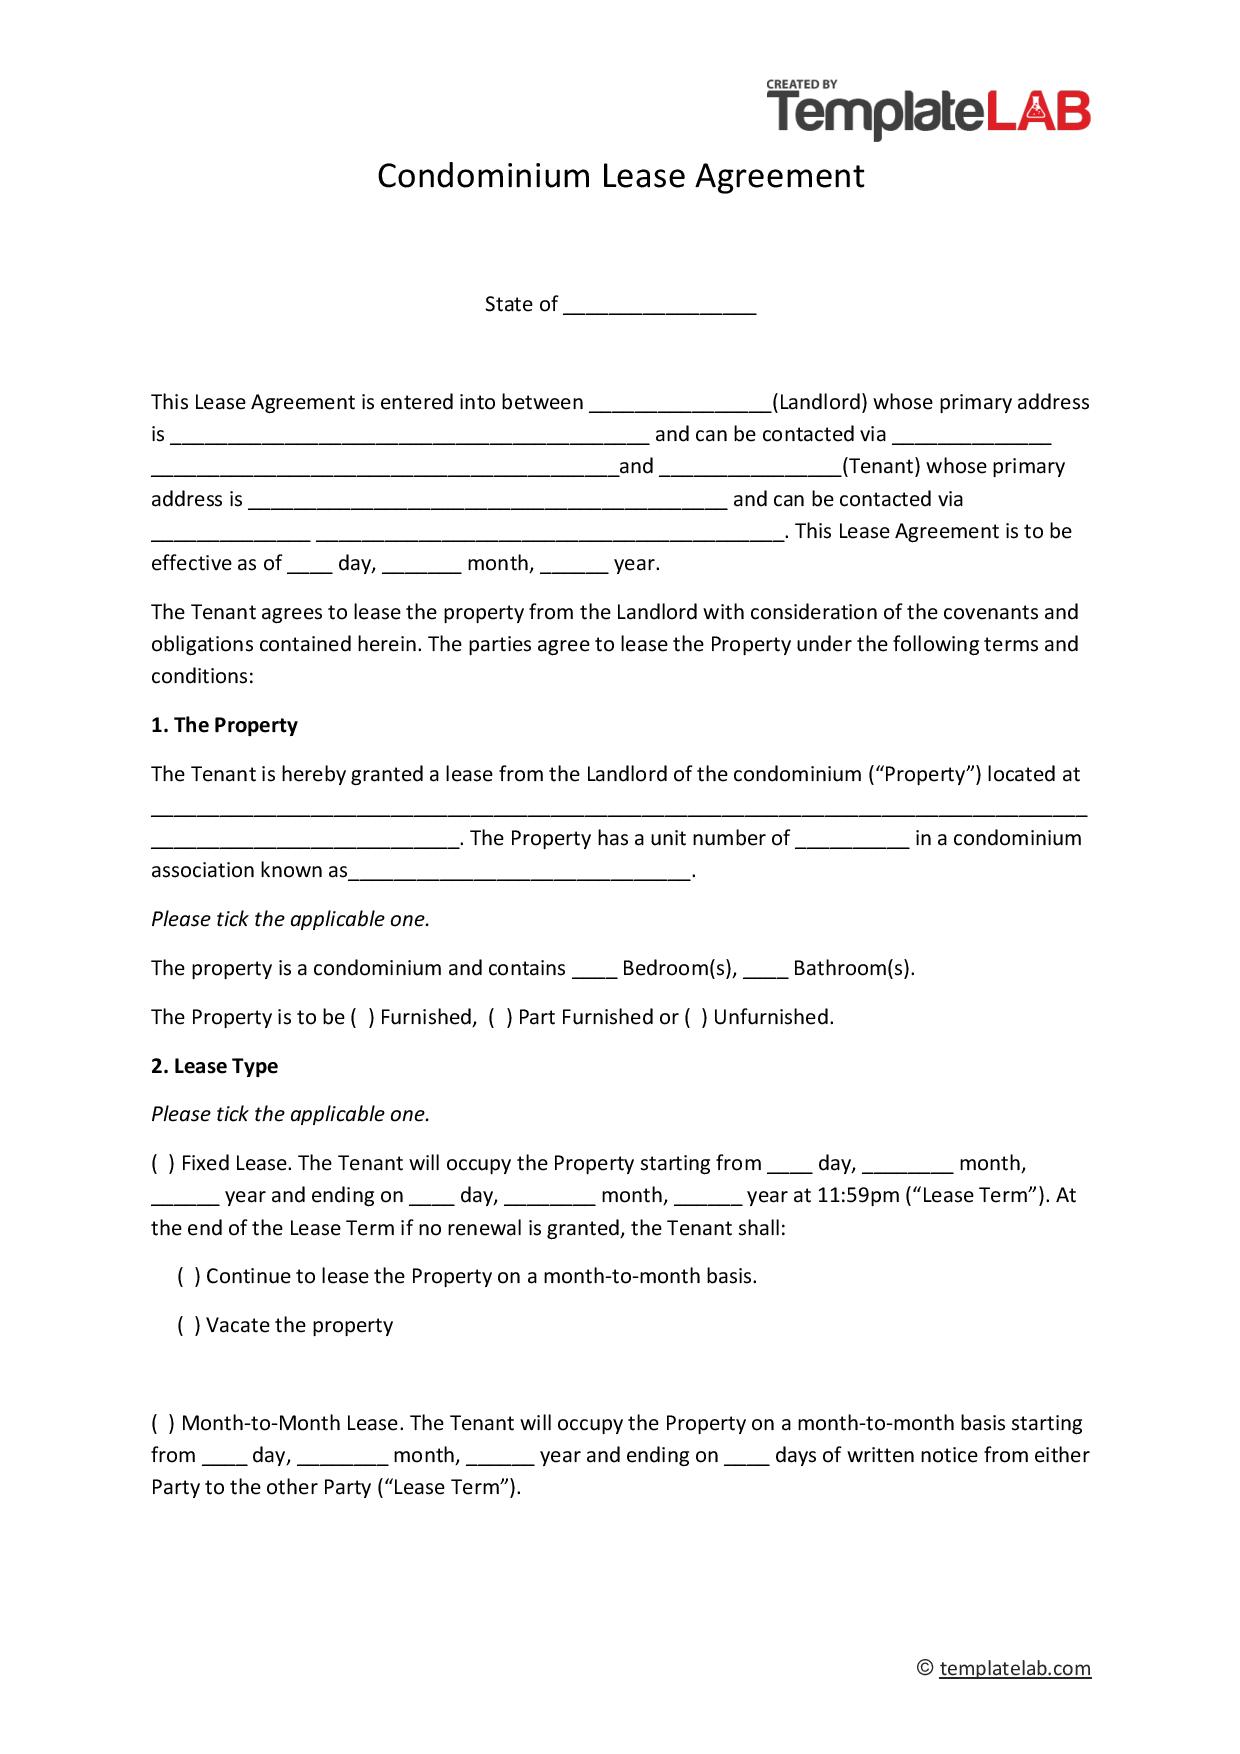 44 Free Residential Lease Agreement Templates [Word/PDF]